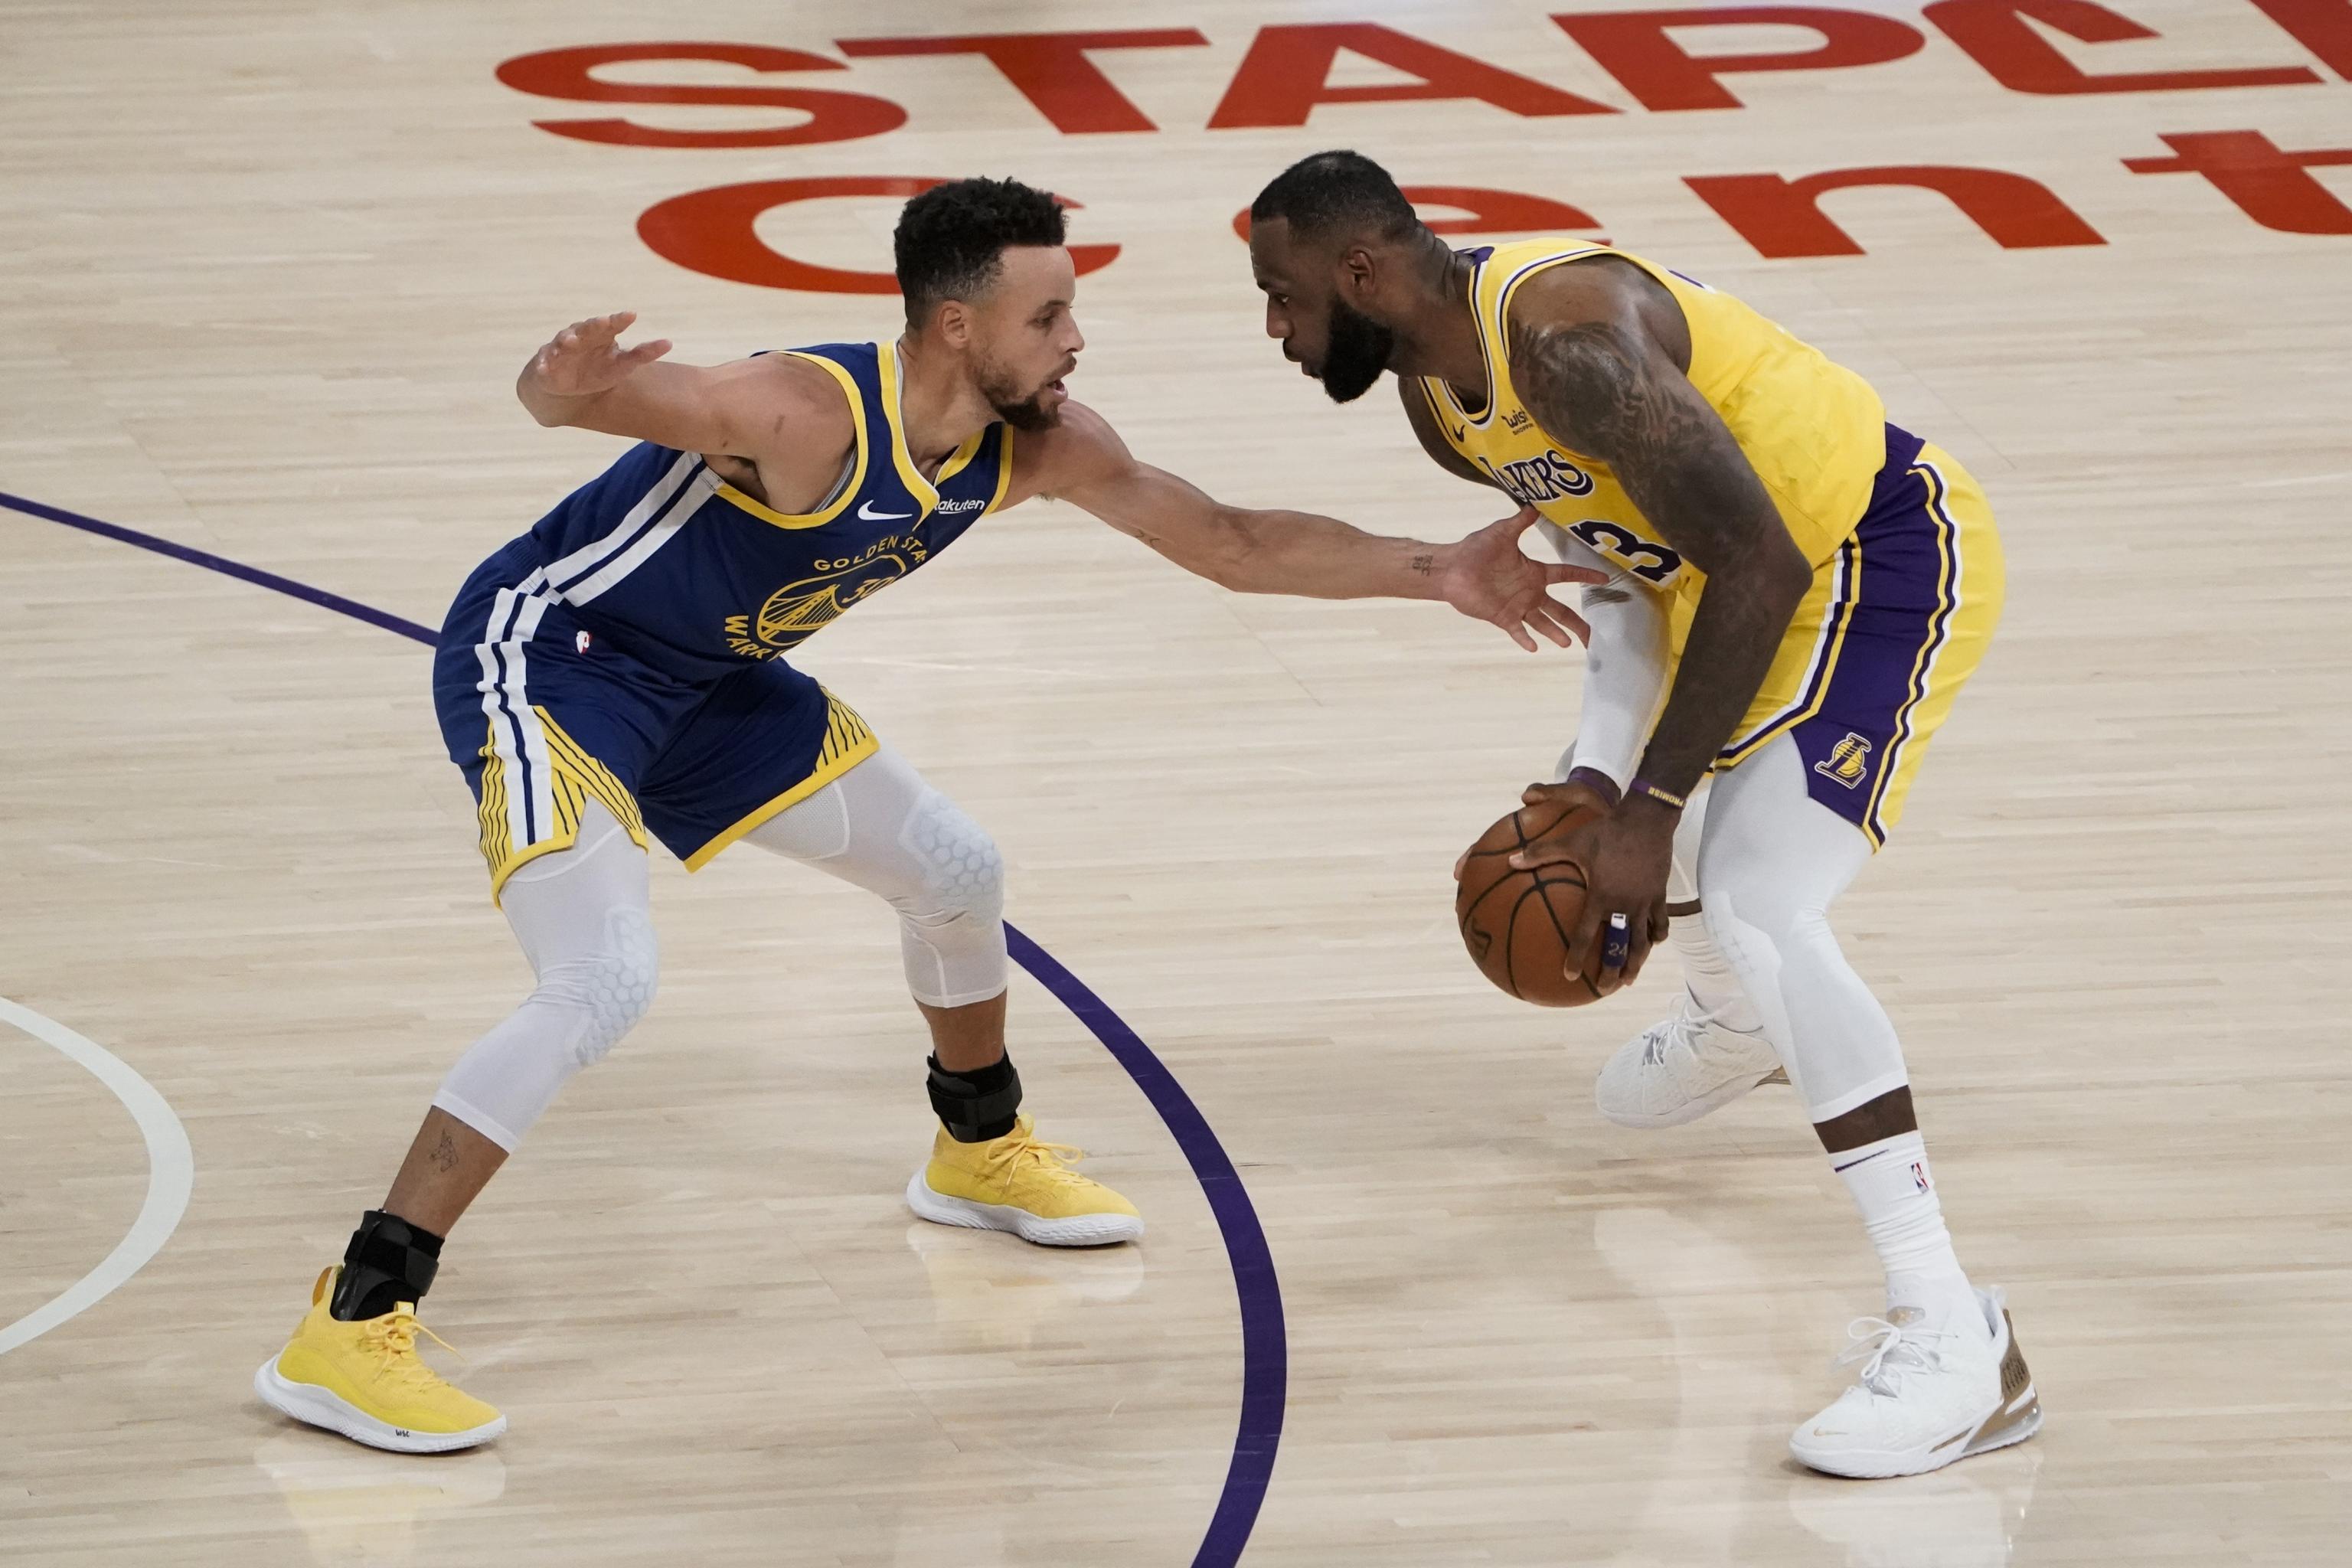 Curry's triple-double leads Warriors past Lakers; Bucks win